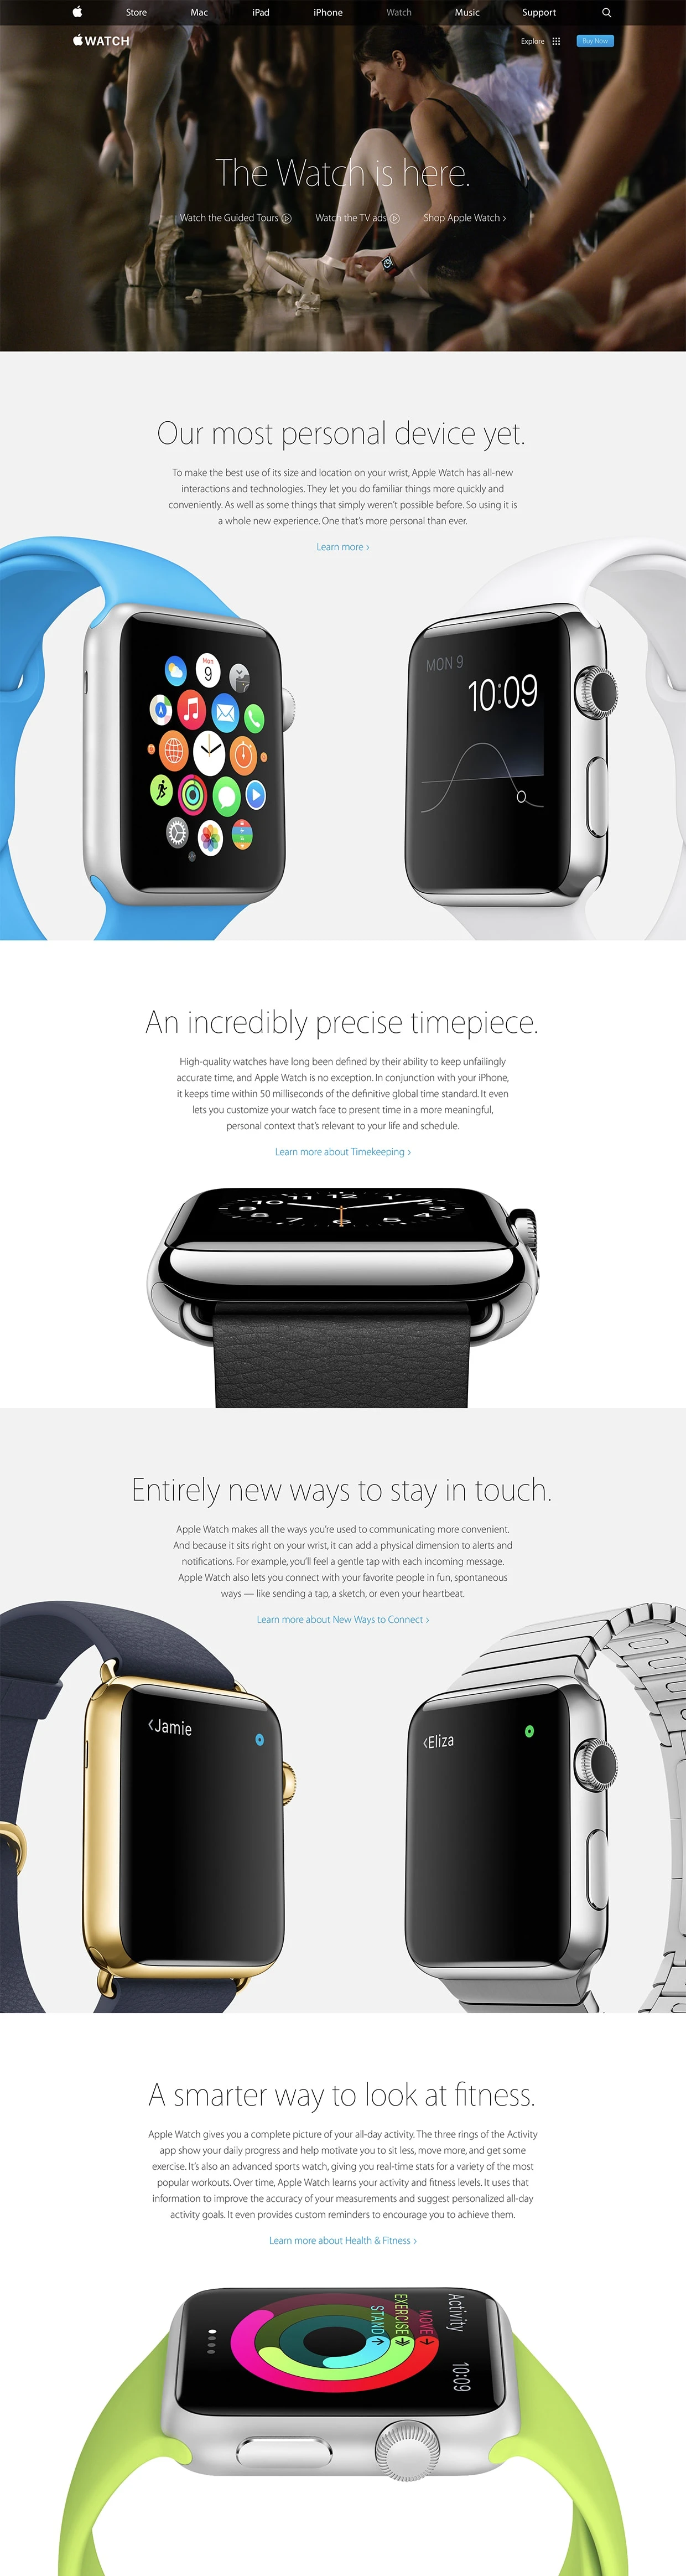 Apple Watch Landing Page Example: Apple Watch is the most personal product we’ve ever made, because it’s the first one designed to be worn.